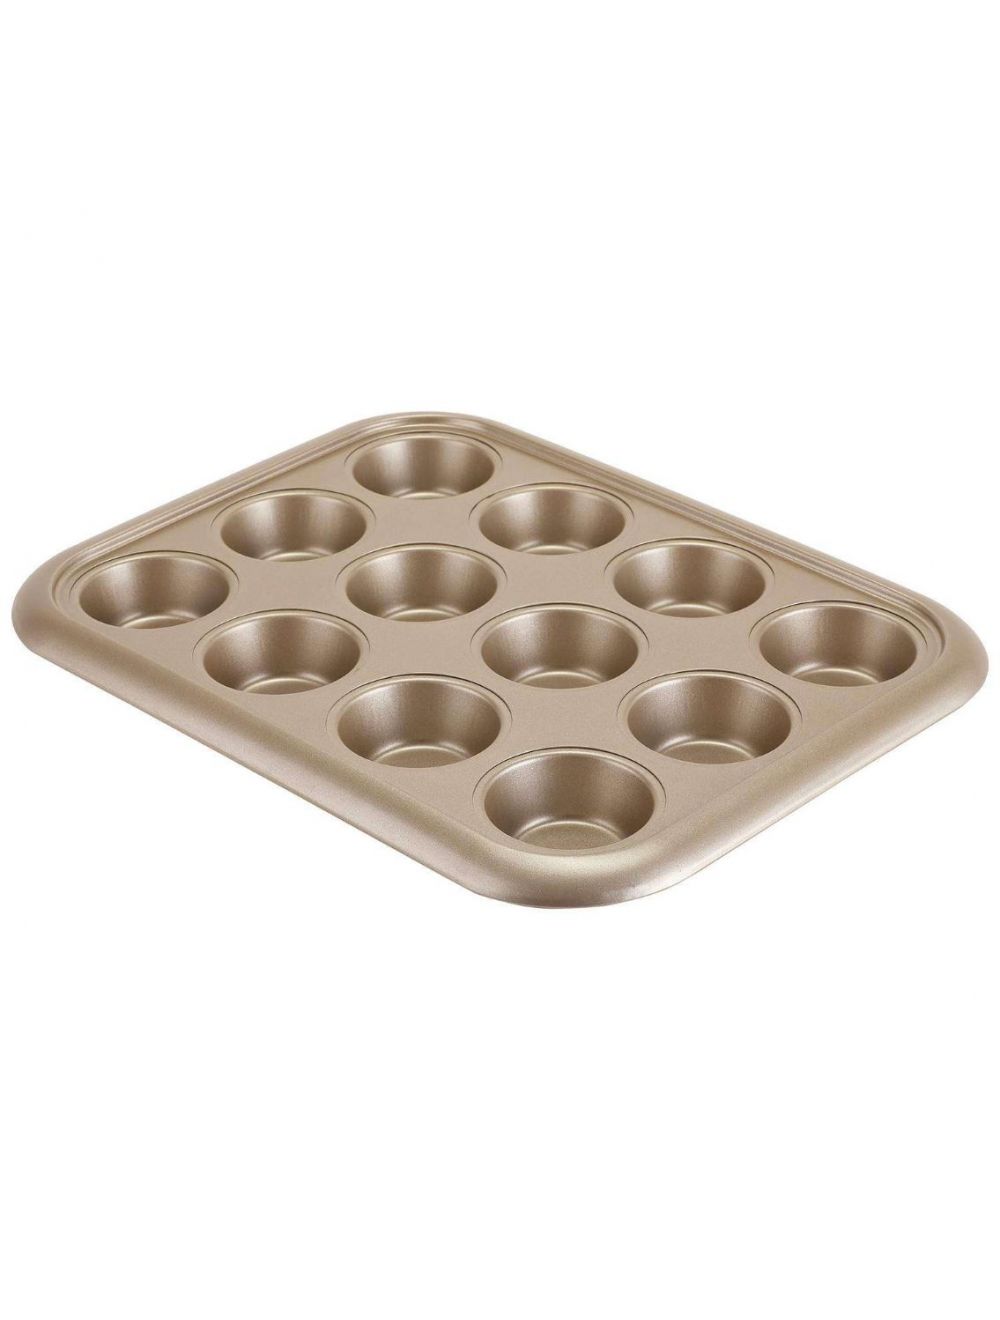 Royalford 12 Cup Muffin Pan